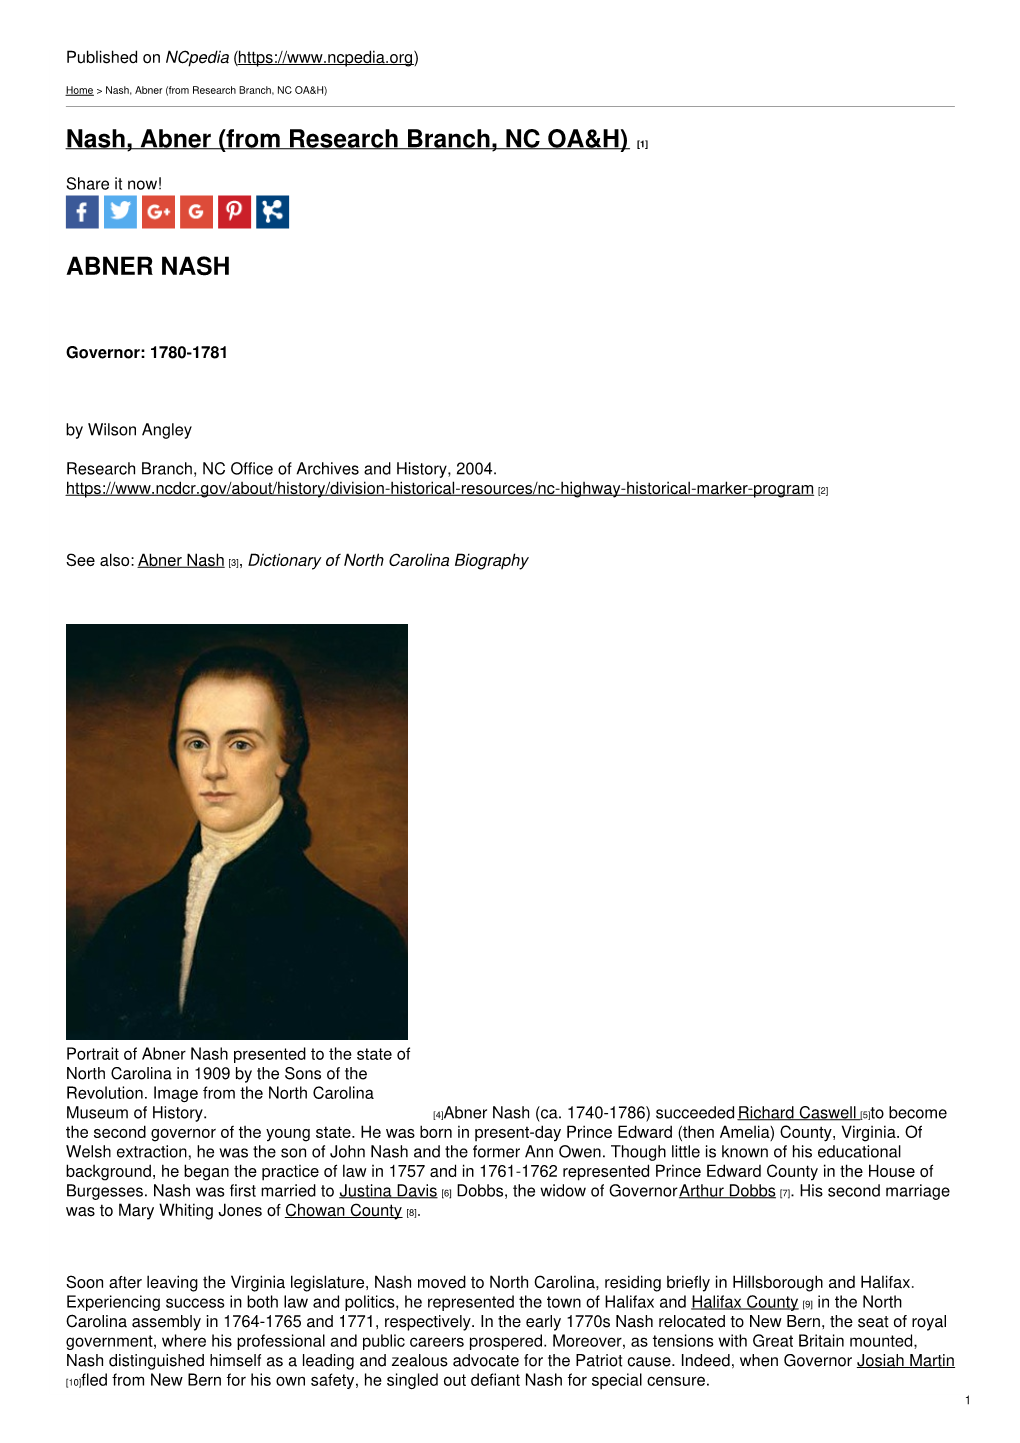 Nash, Abner (From Research Branch, NC OA&H)